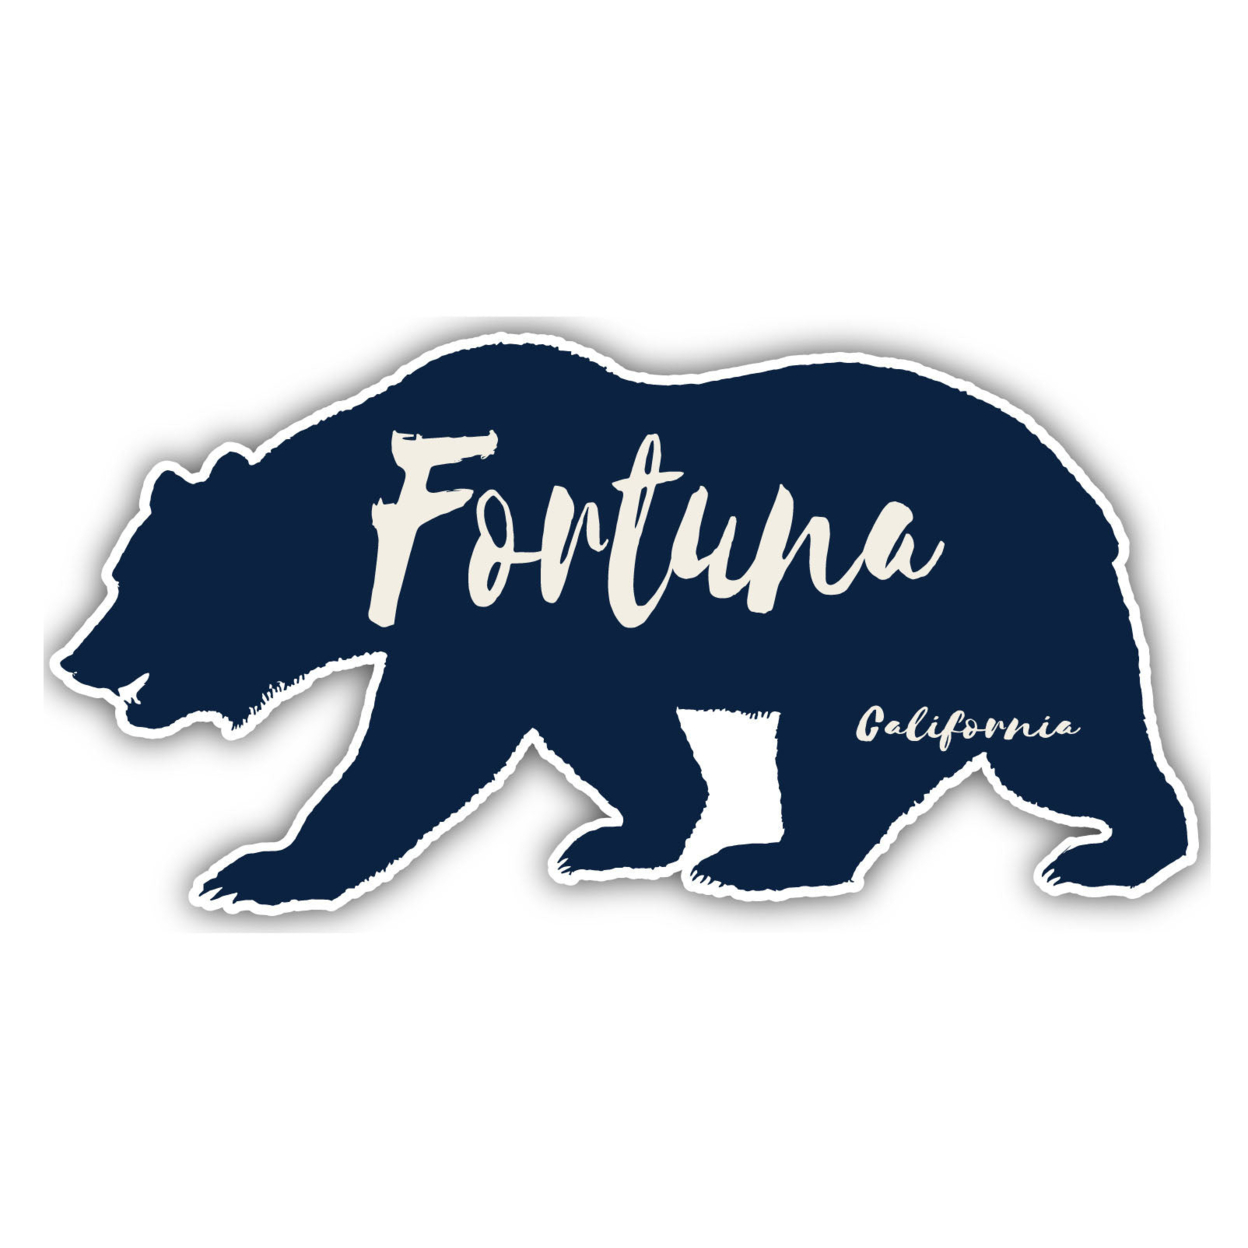 Fortuna California Souvenir Decorative Stickers (Choose Theme And Size) - 4-Pack, 2-Inch, Bear